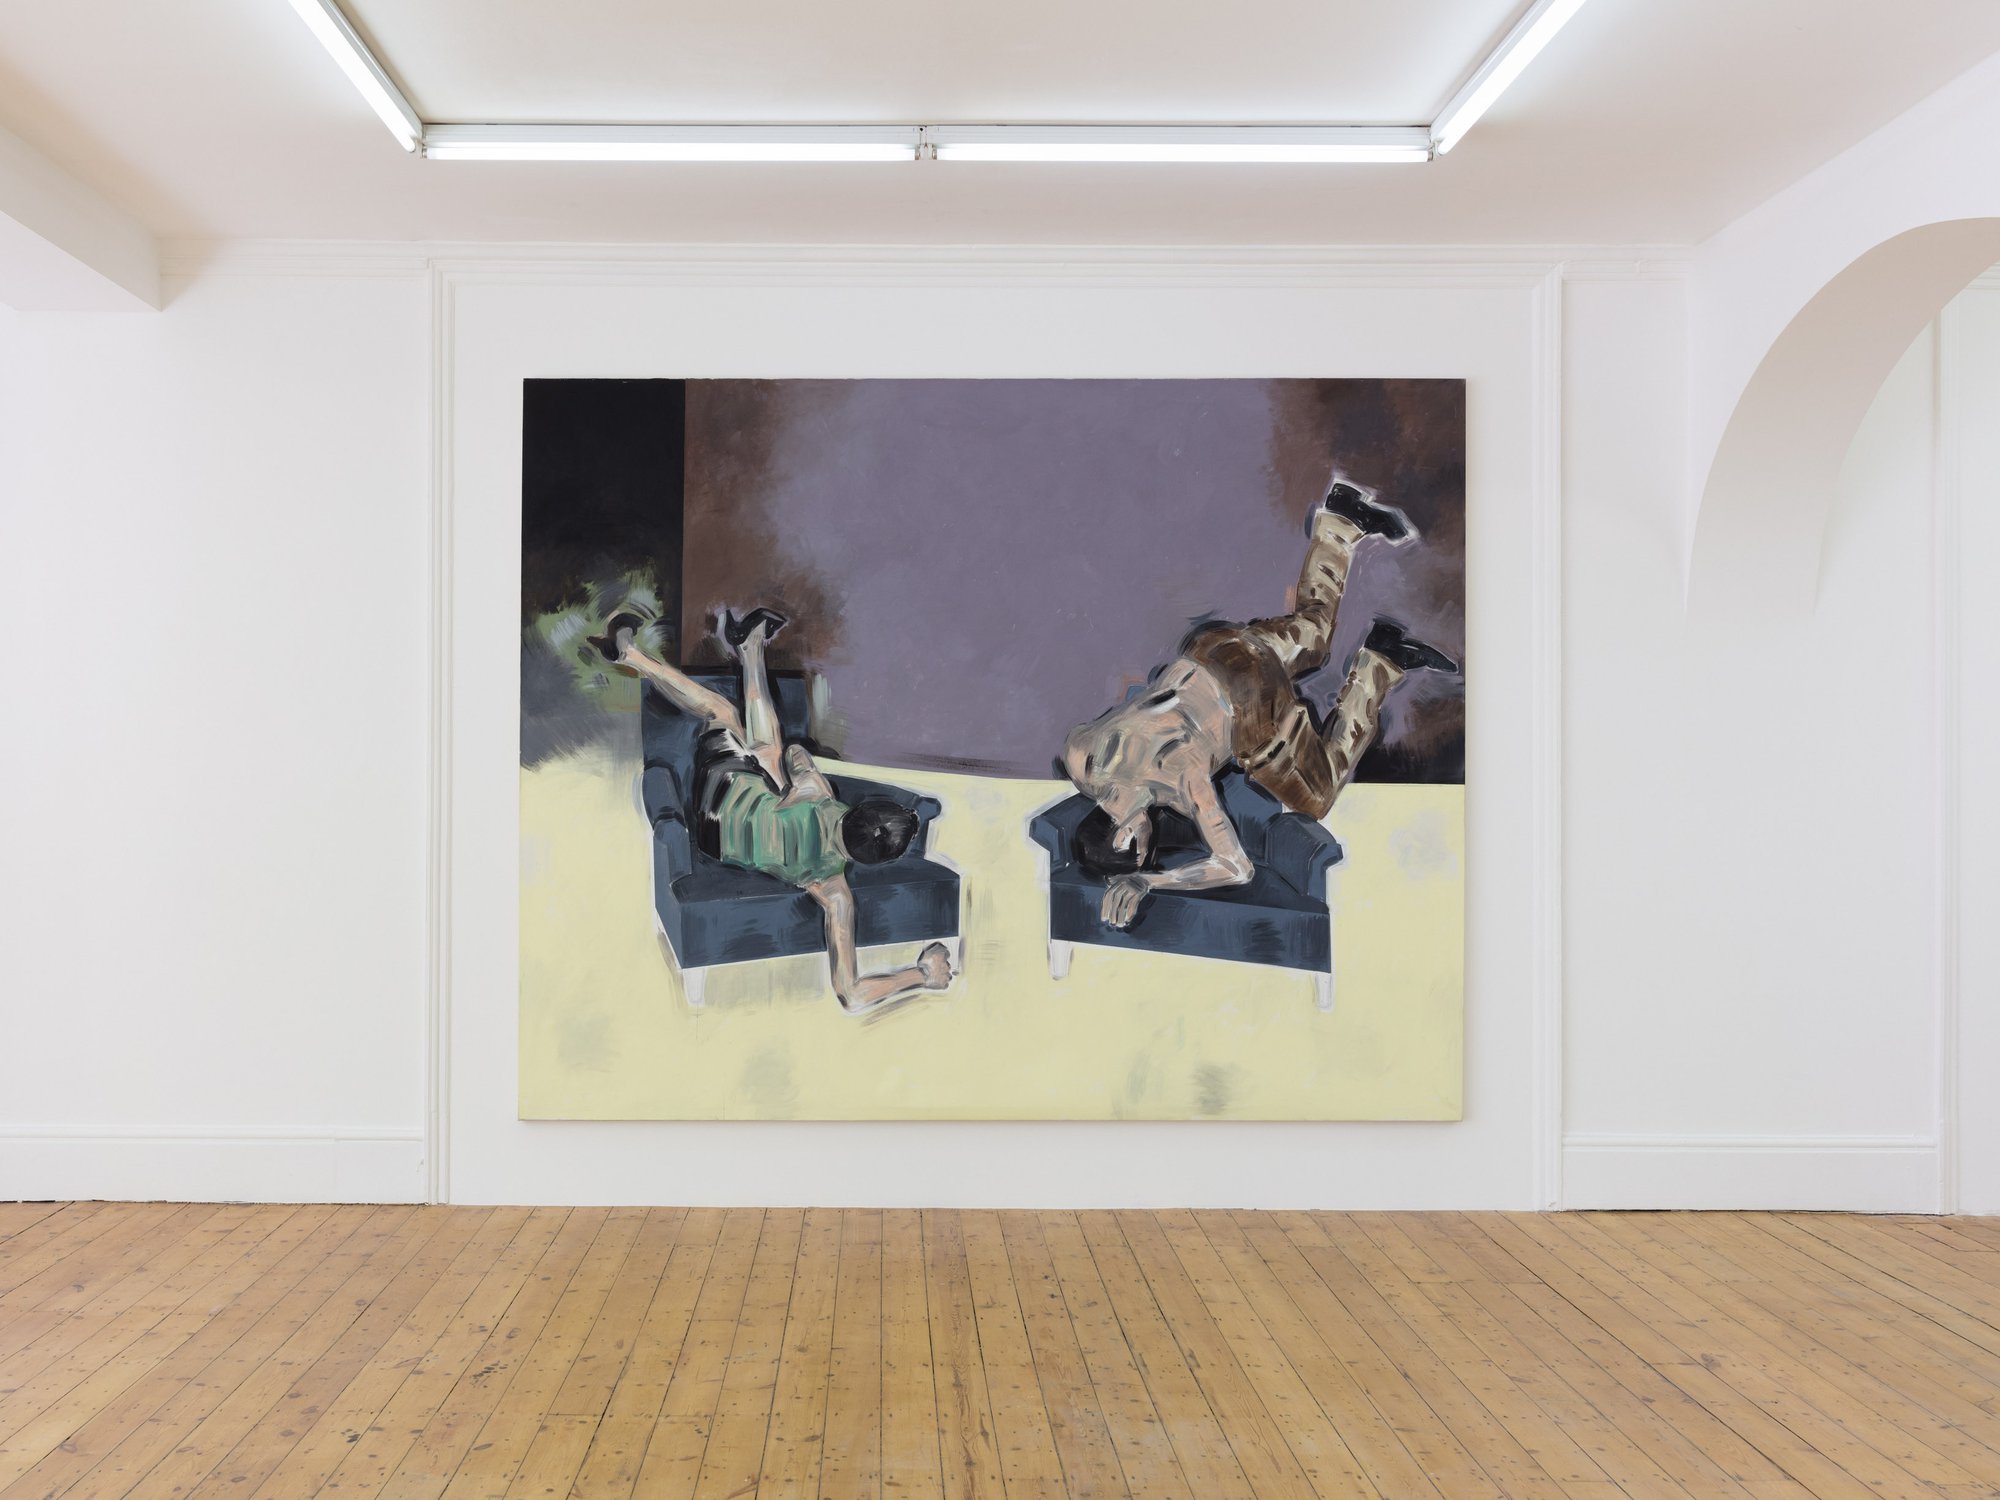 Installation view, Apostolos Georgiou, From My Heart, Rodeo, London, 2018